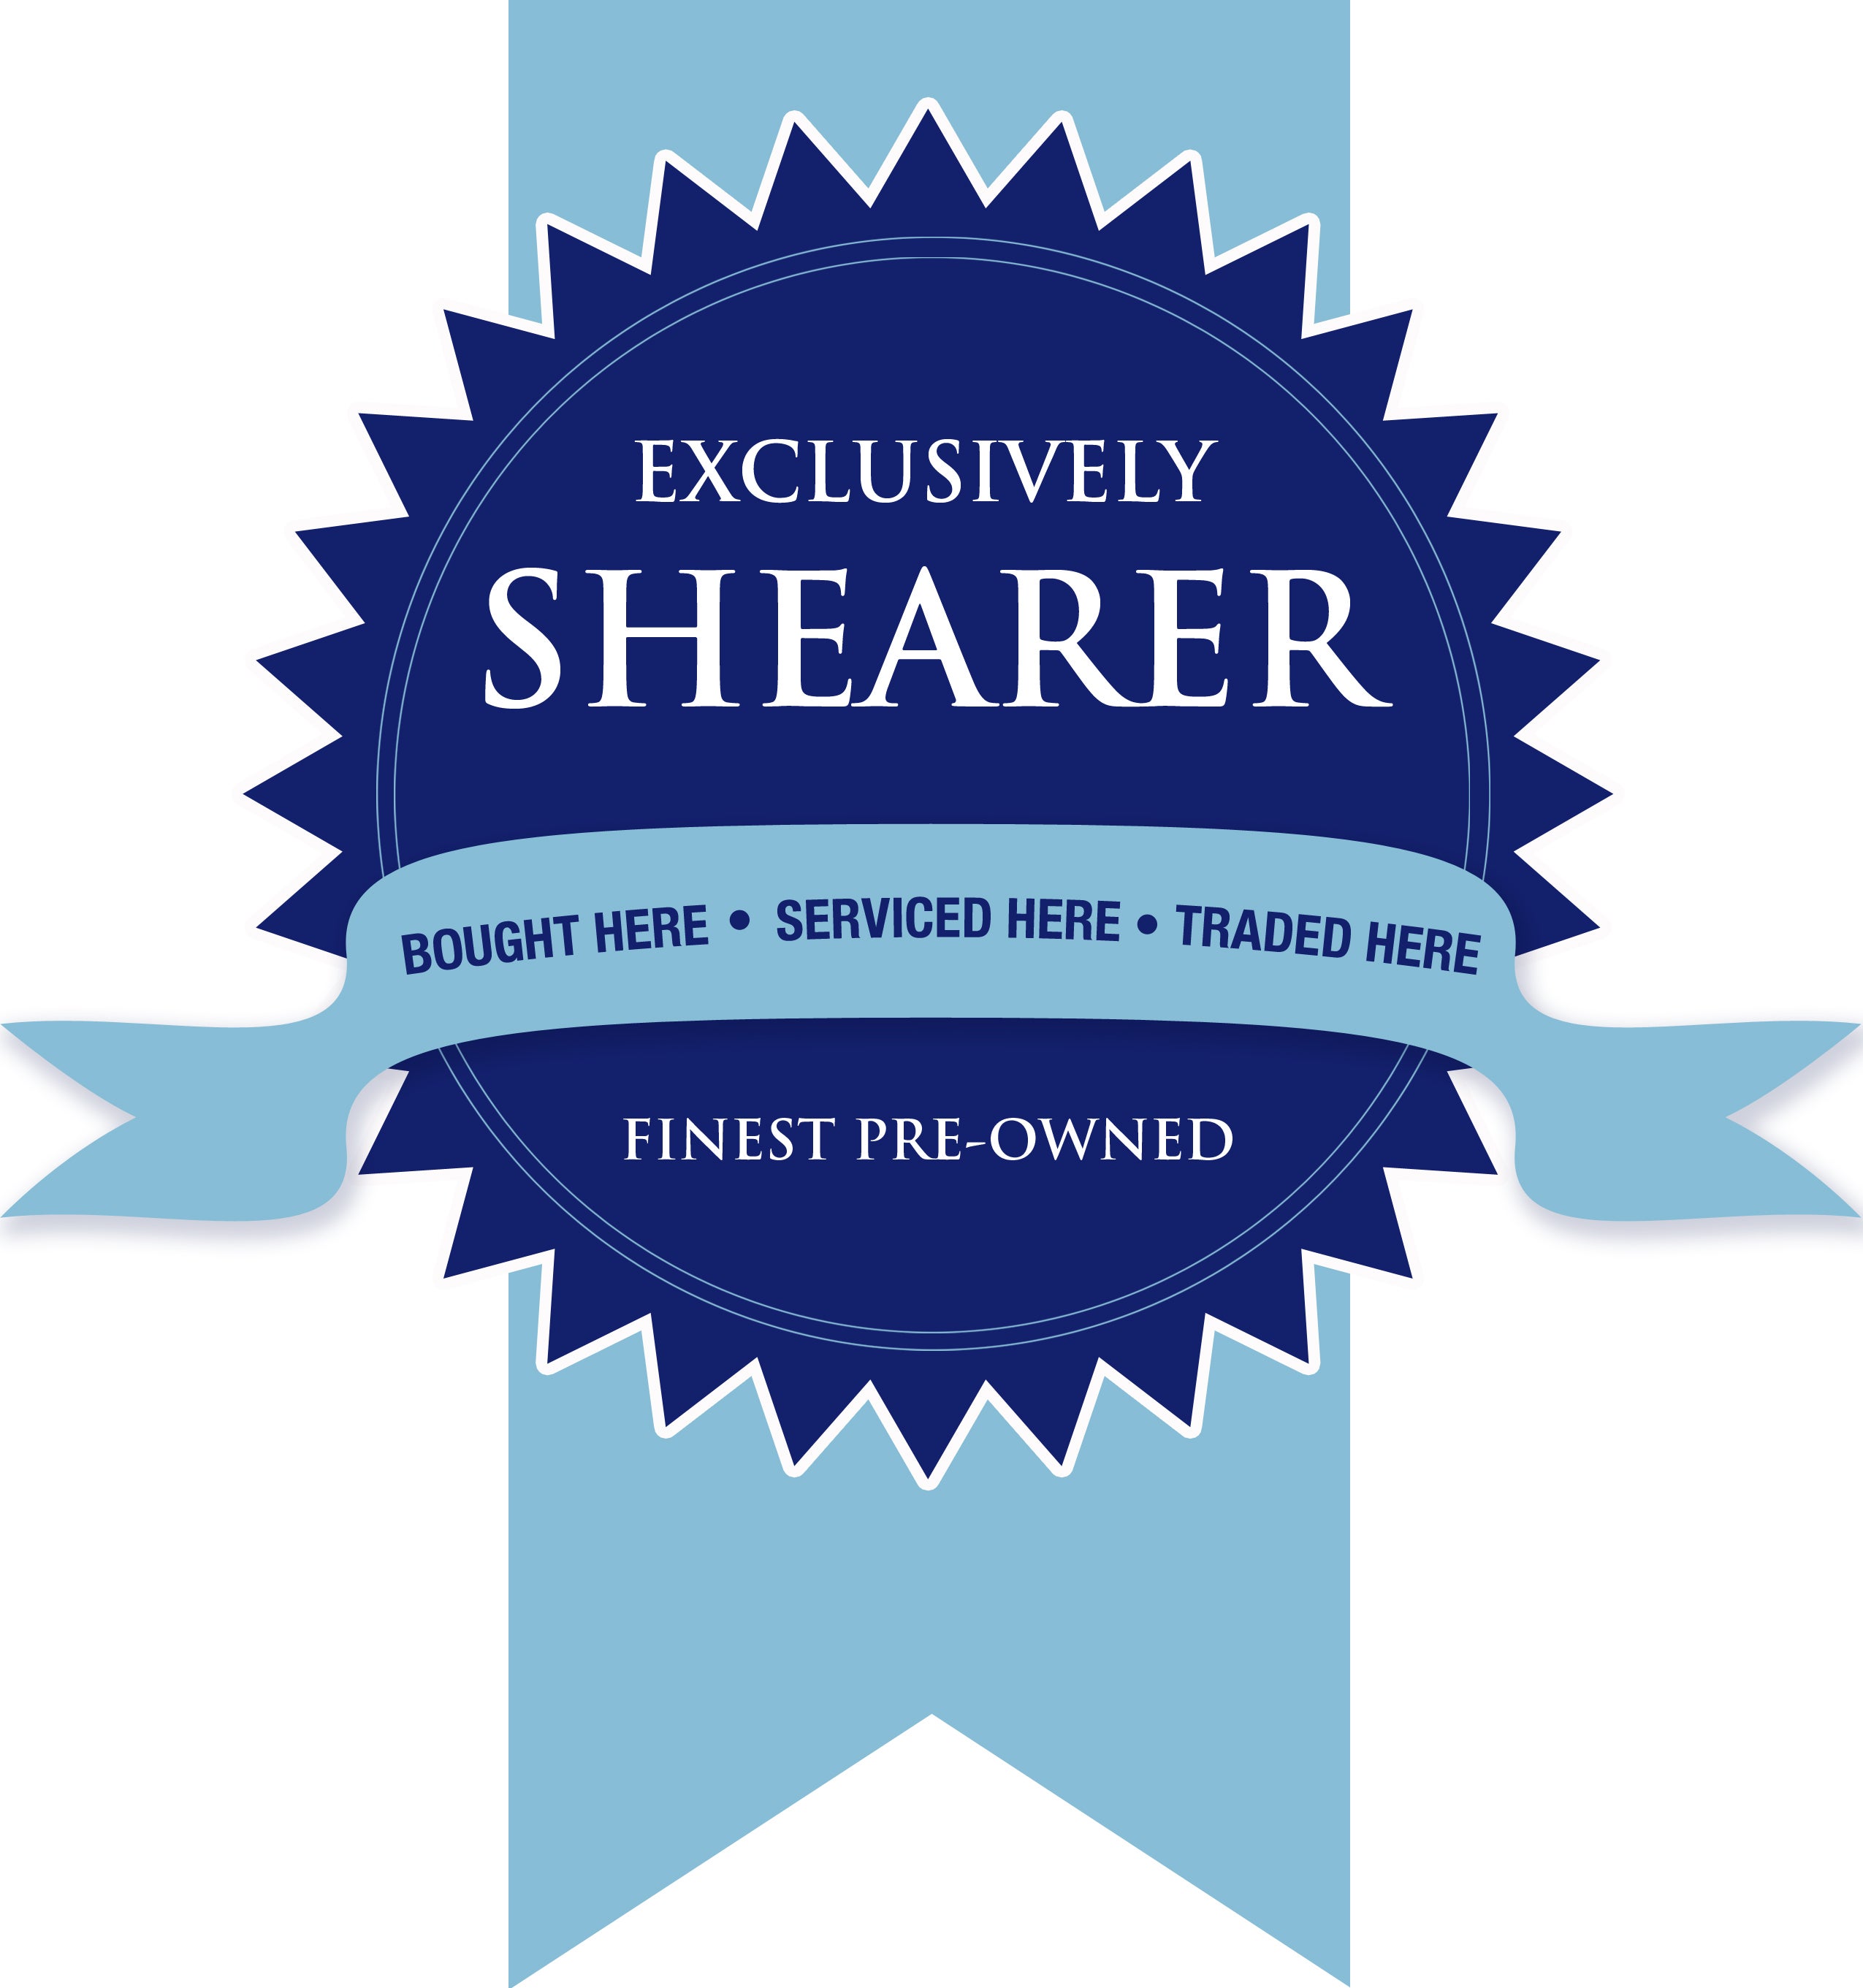 Exclusively Shearer